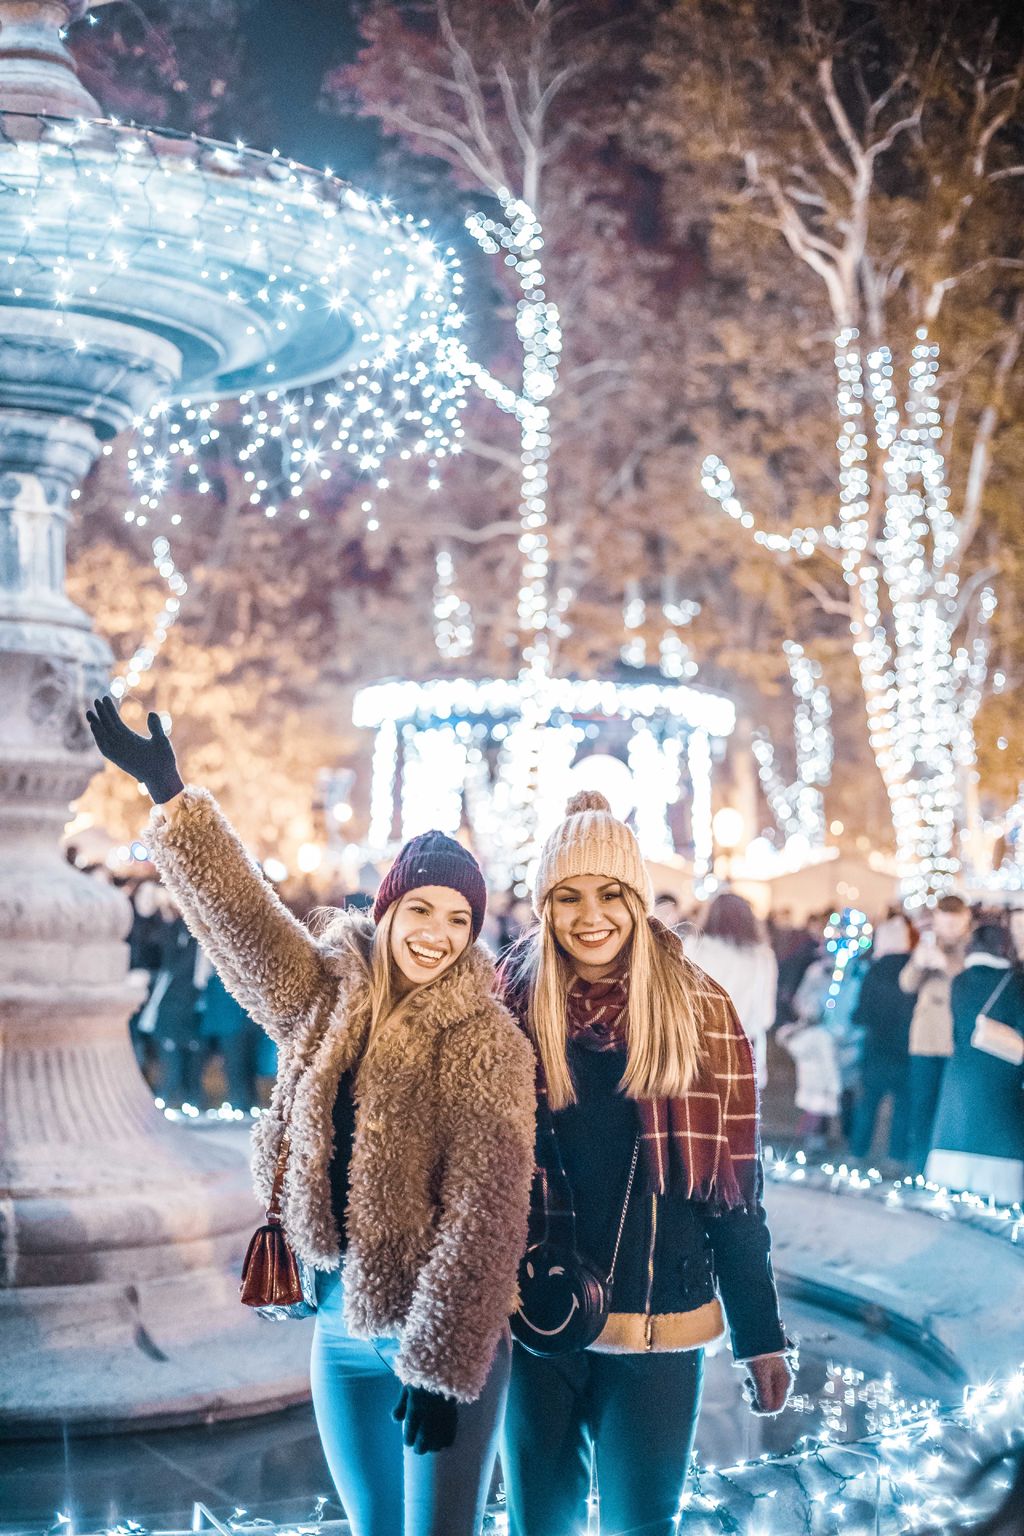 Zagreb voted No.3 Best Christmas Markets in the World for 2019 Preview_advent-on-zrinjevac-2-julien-duval-5c9b7250a0090